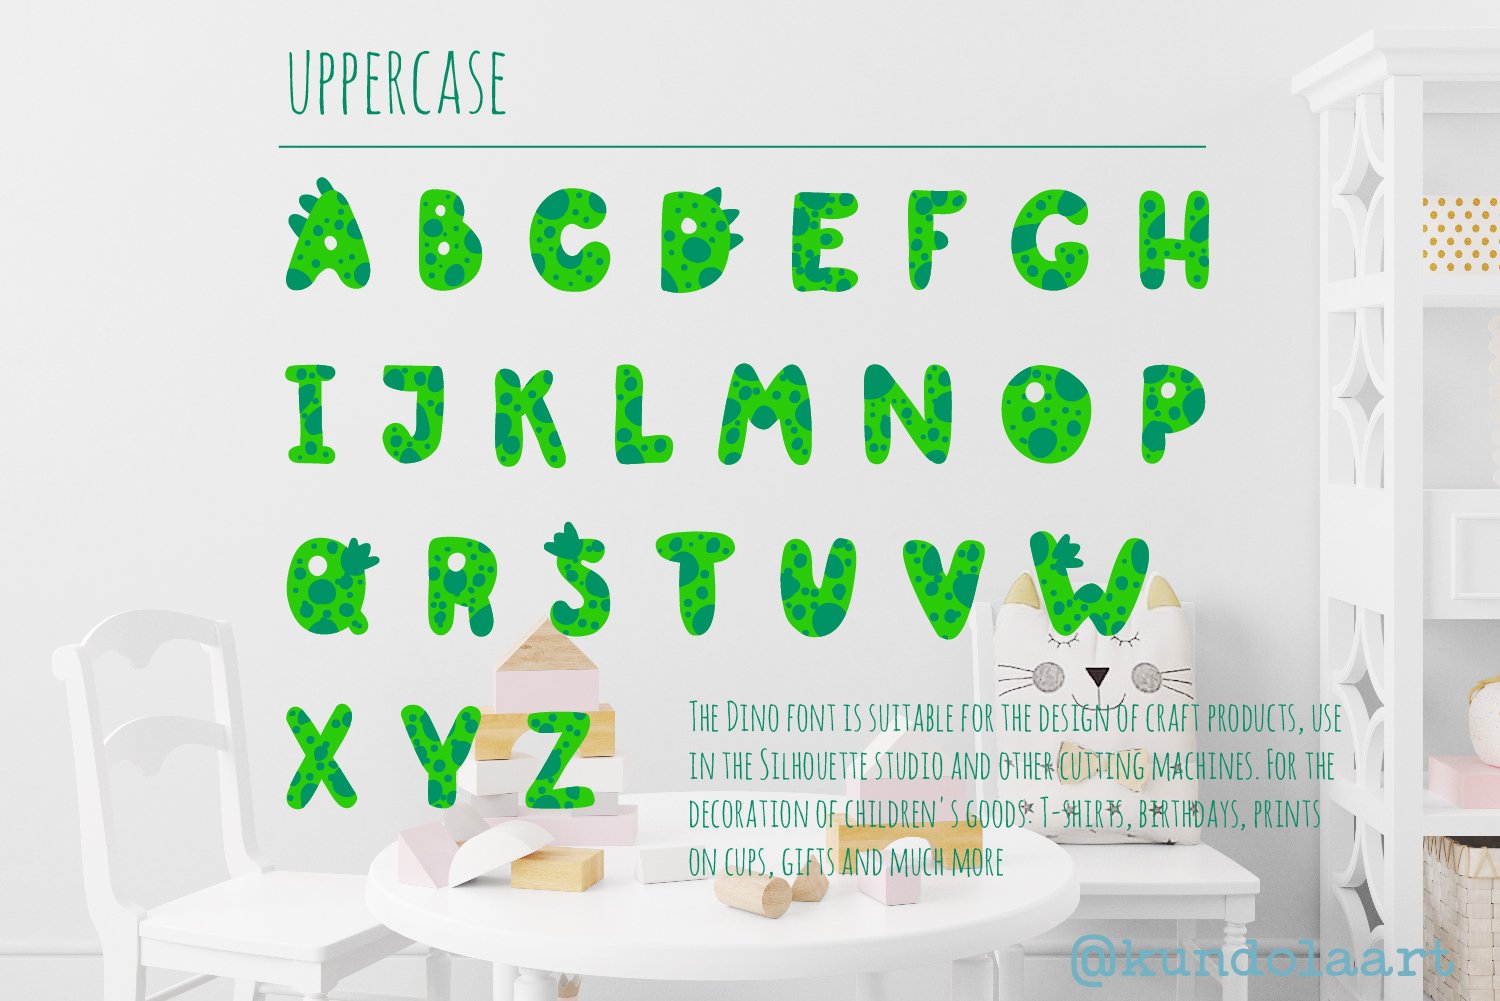 Dino green Font. Color cute dinosaur preview image.